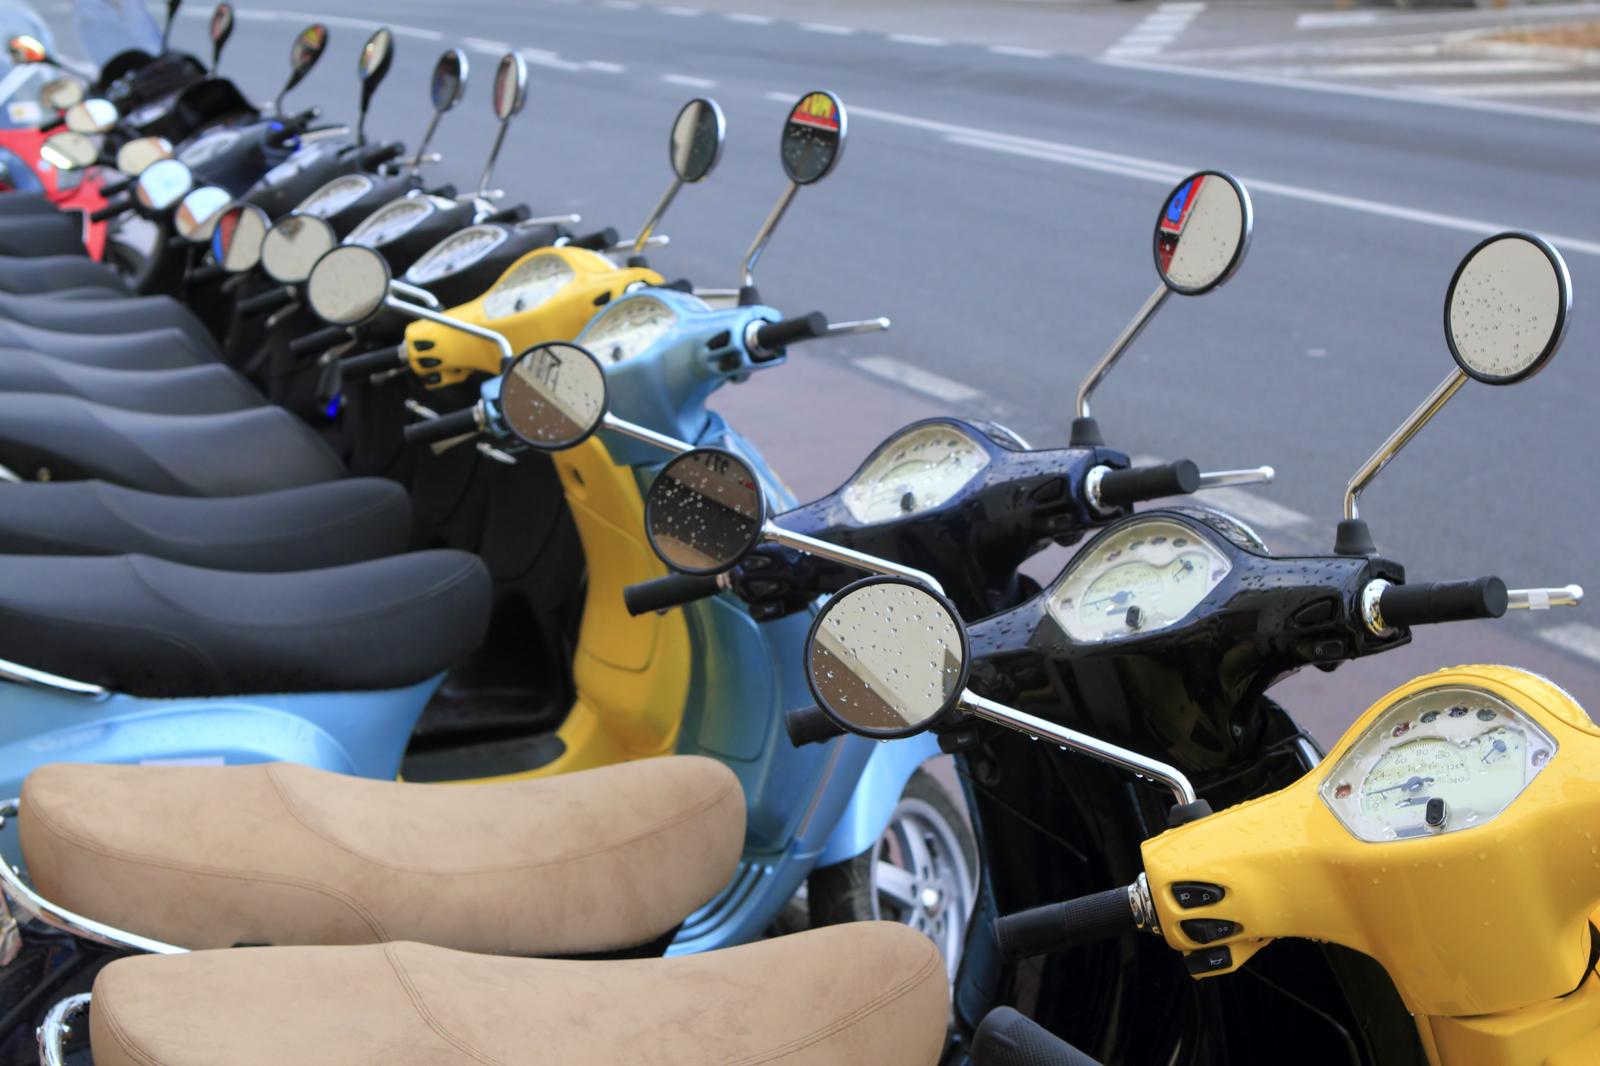 Sale, maintenance and repair of motorcycles and related parts and accessories in Harju county